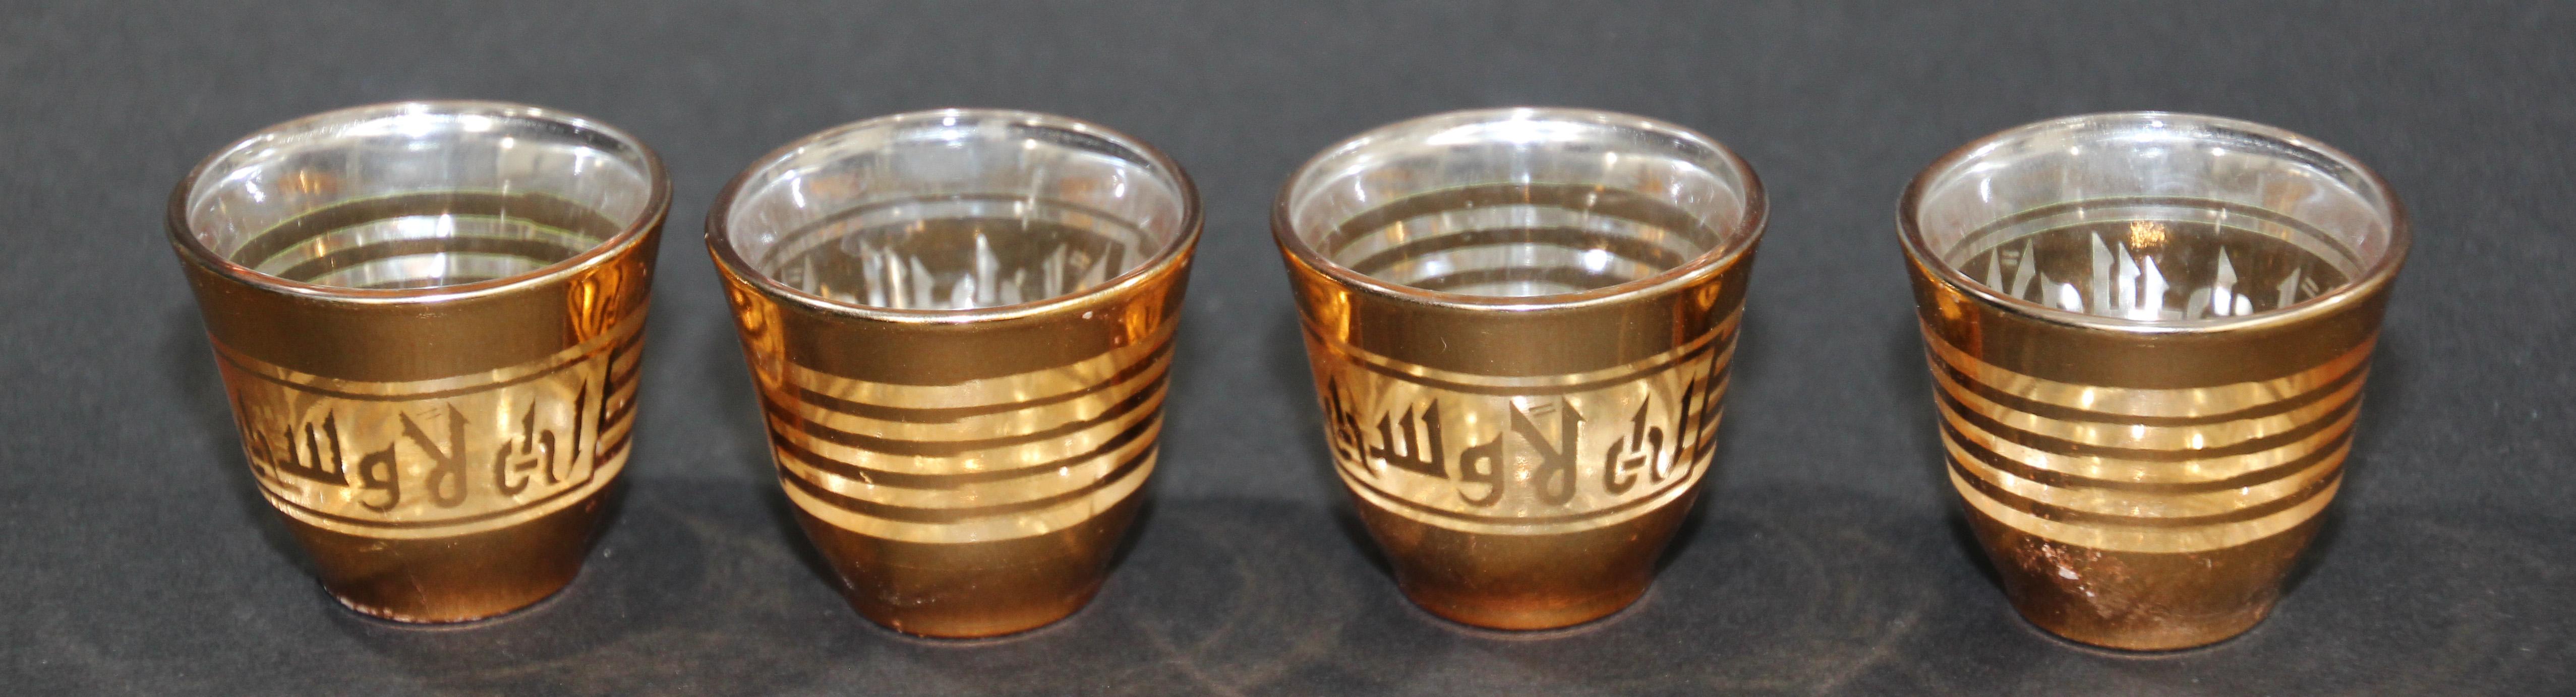 Set of four Arabic shot glasses with gold raised overlay design.
Use these elegant glasses for Moroccan, Middle Eastern, Persian tea, or any hot or cold shot liquor drink.
In fantastic condition, perfect for the holidays and gorgeous on display in